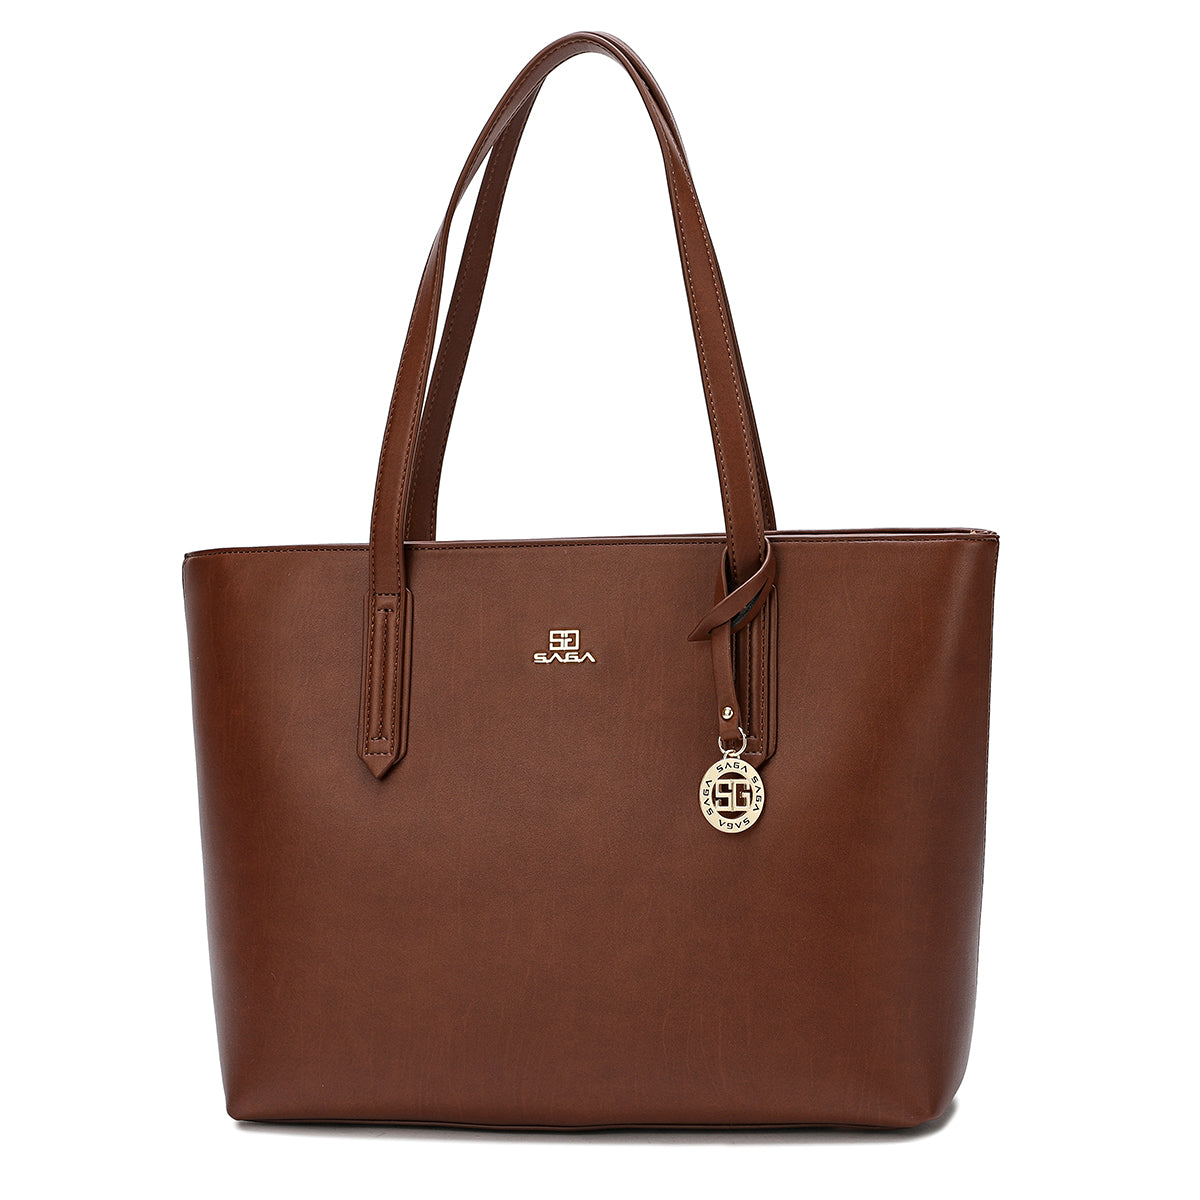 A spacious and practical handbag with a sophisticated design and several colors